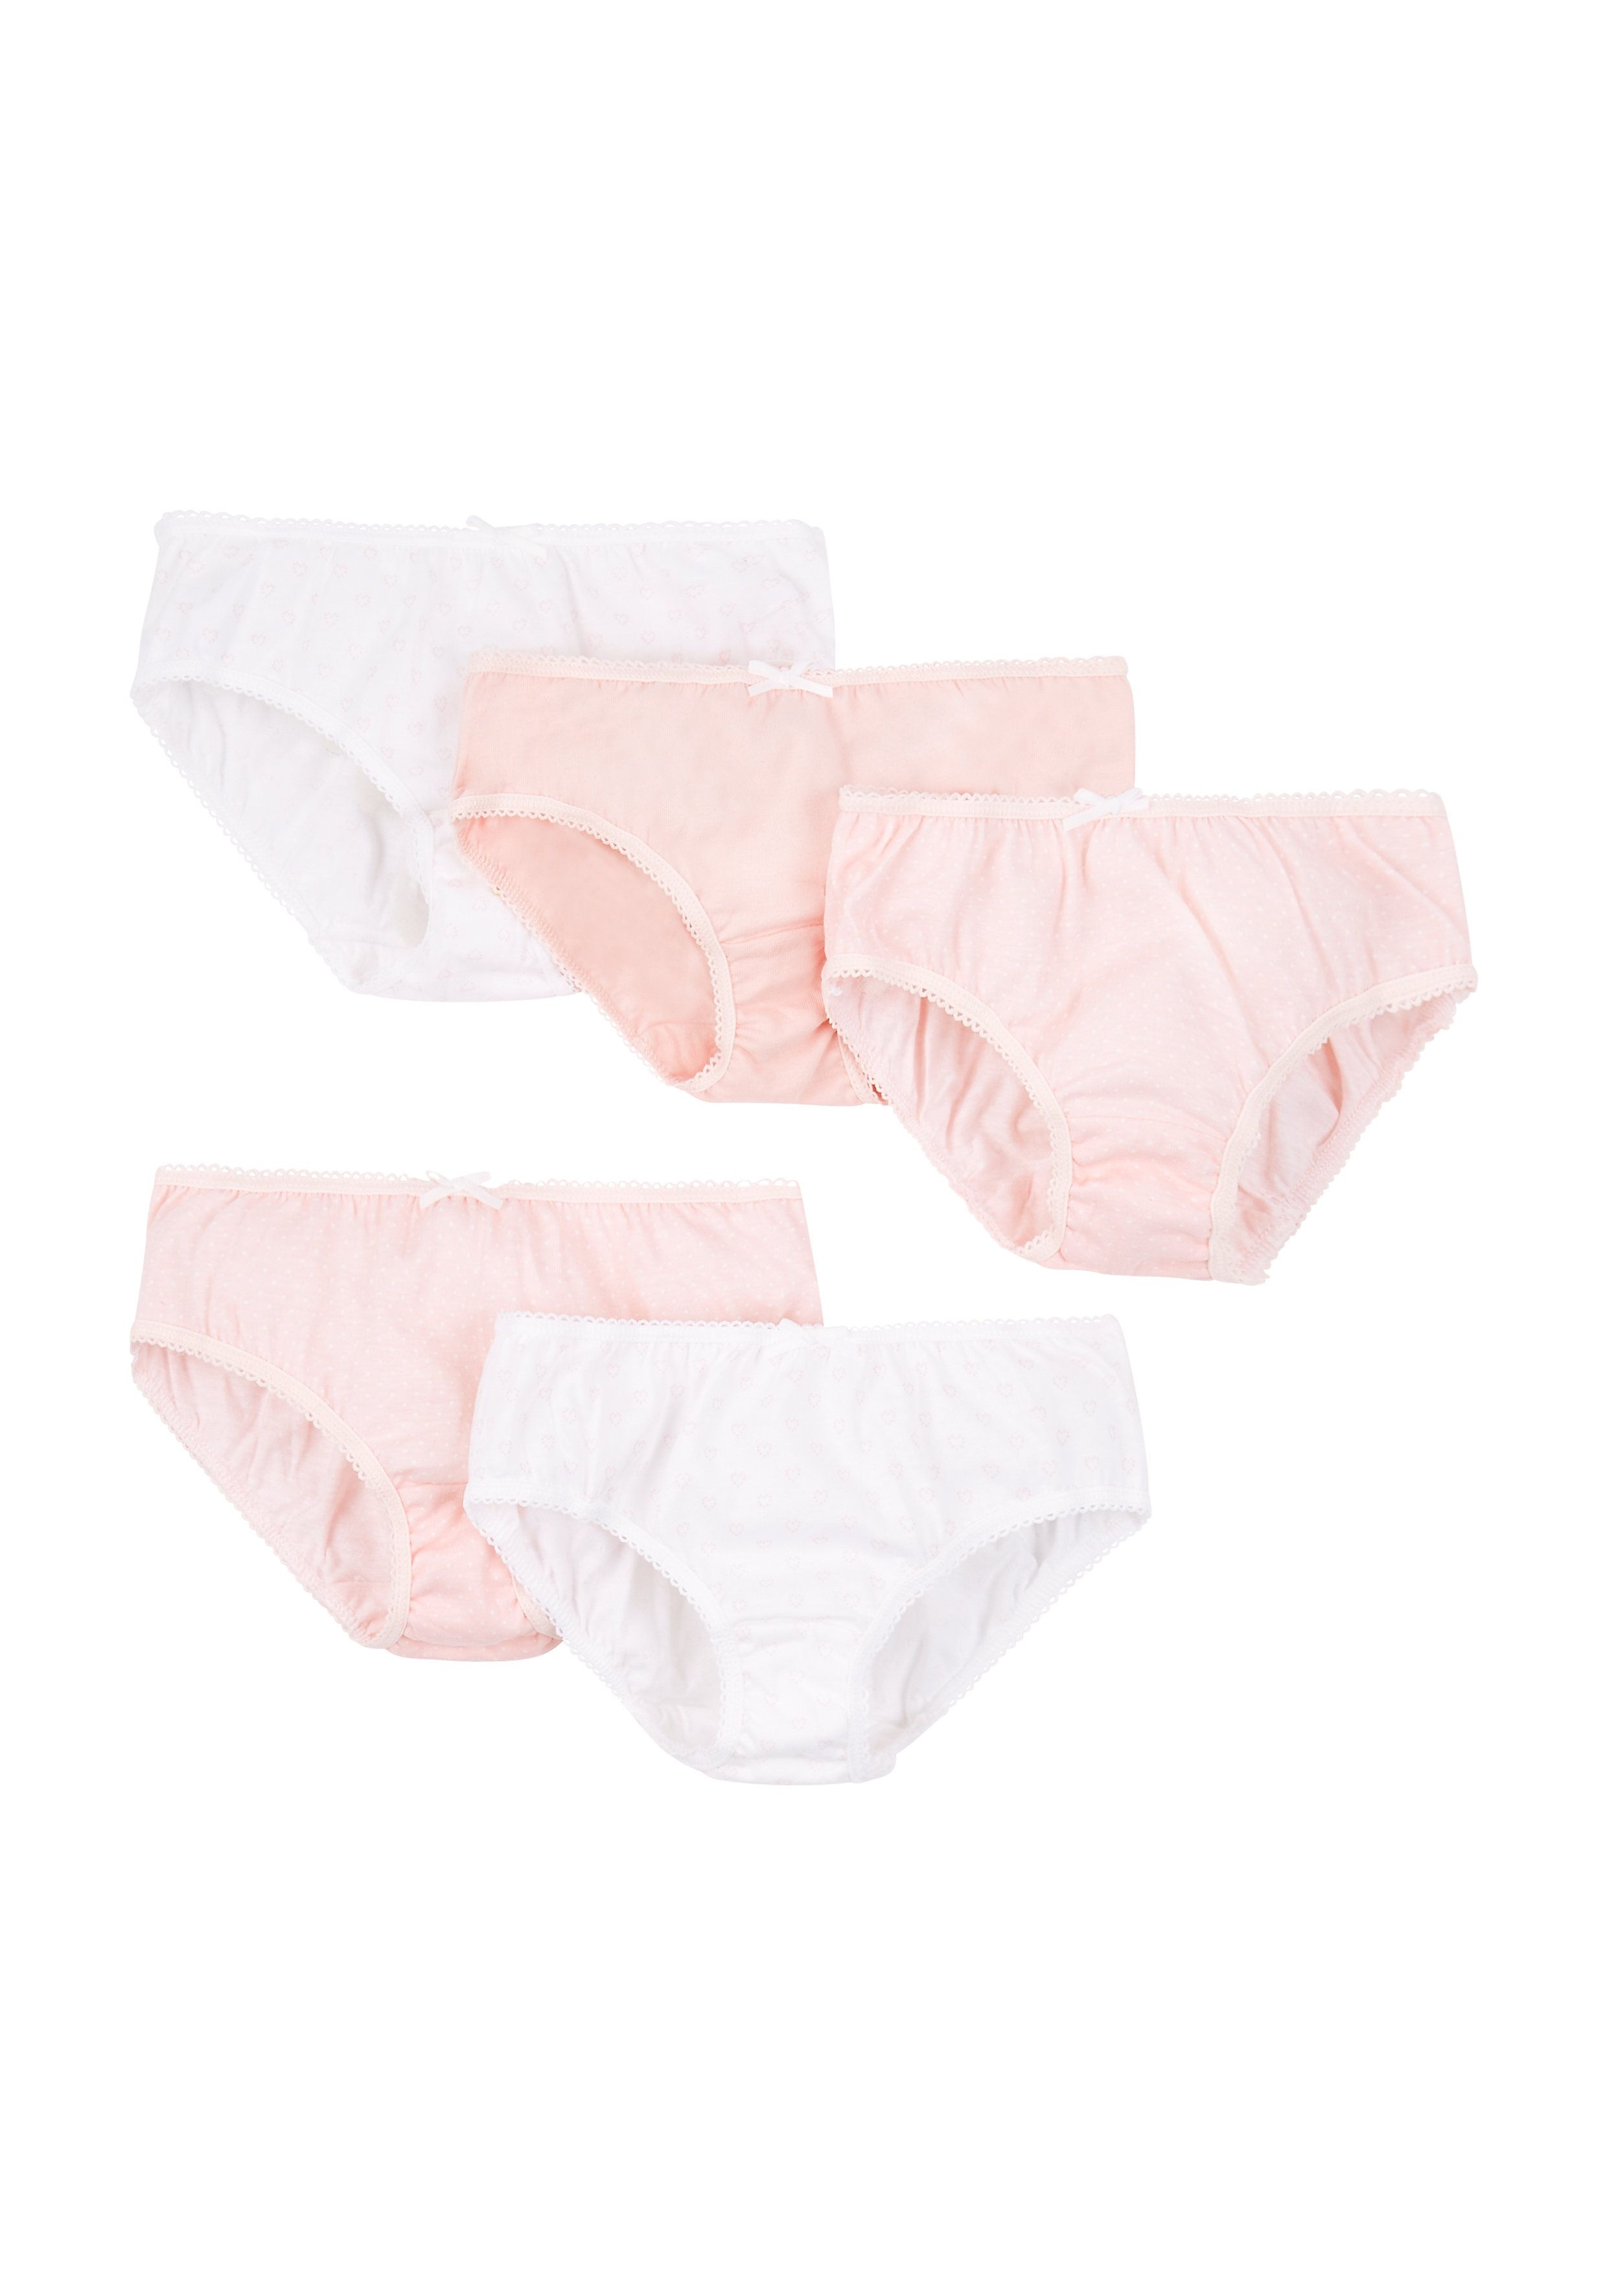 Mothercare | Girls Pink And White Briefs - 5 Pack - Multicolor